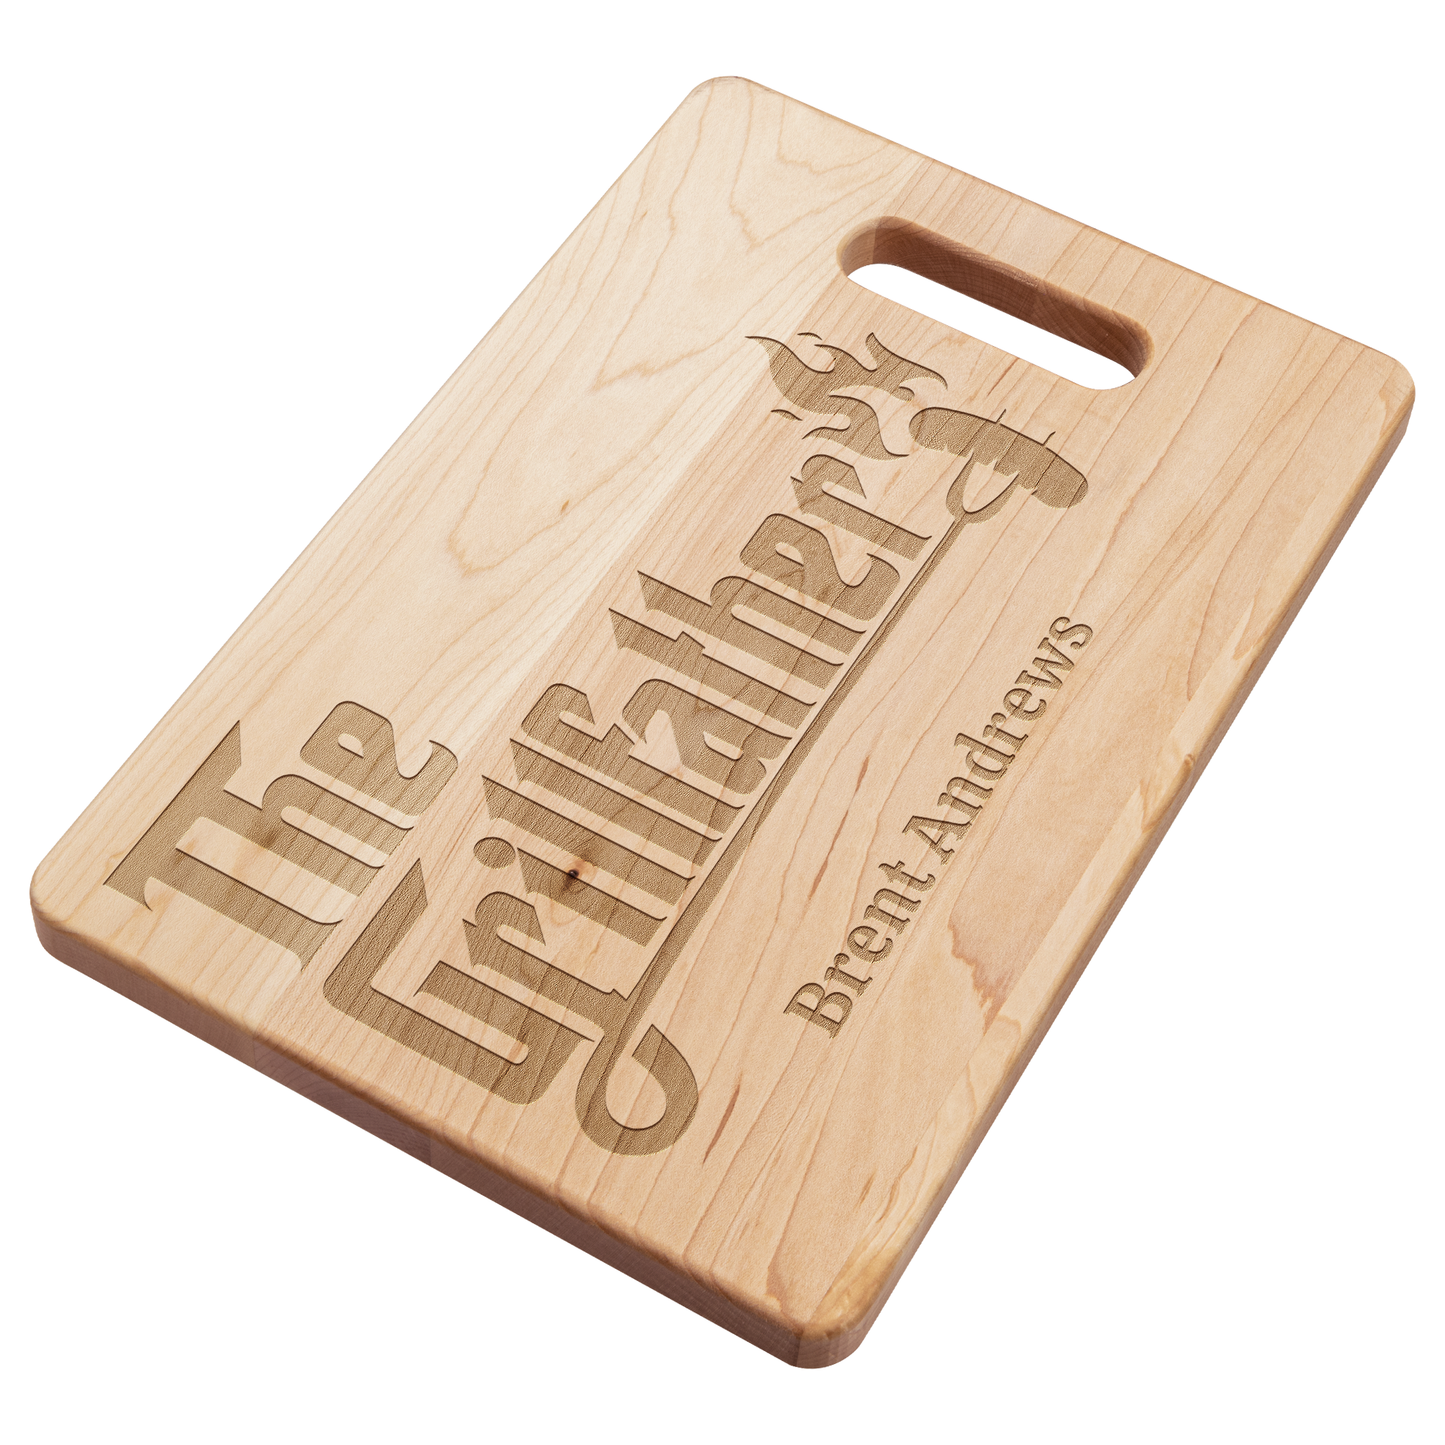 Get trendy with "The GrillFather " Maple Cutting Board -  available at Good Gift Company. Grab yours for $25 today!